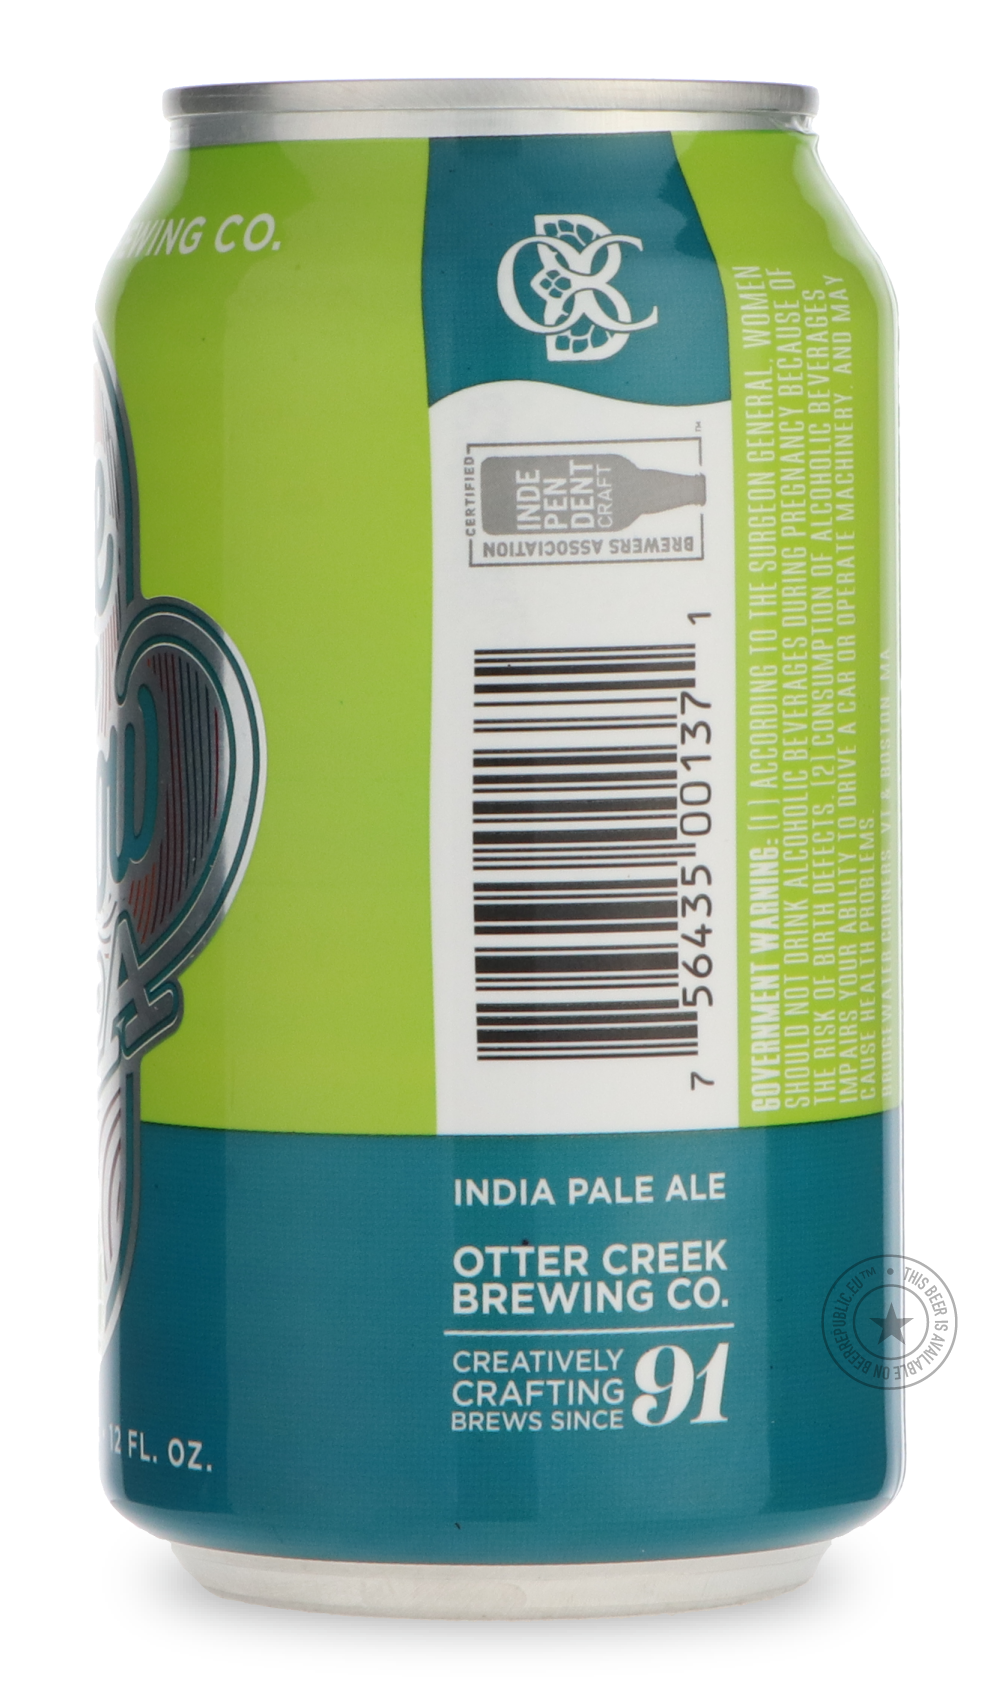 -Otter Creek- Free Flow-IPA- Only @ Beer Republic - The best online beer store for American & Canadian craft beer - Buy beer online from the USA and Canada - Bier online kopen - Amerikaans bier kopen - Craft beer store - Craft beer kopen - Amerikanisch bier kaufen - Bier online kaufen - Acheter biere online - IPA - Stout - Porter - New England IPA - Hazy IPA - Imperial Stout - Barrel Aged - Barrel Aged Imperial Stout - Brown - Dark beer - Blond - Blonde - Pilsner - Lager - Wheat - Weizen - Amber - Barley Wi